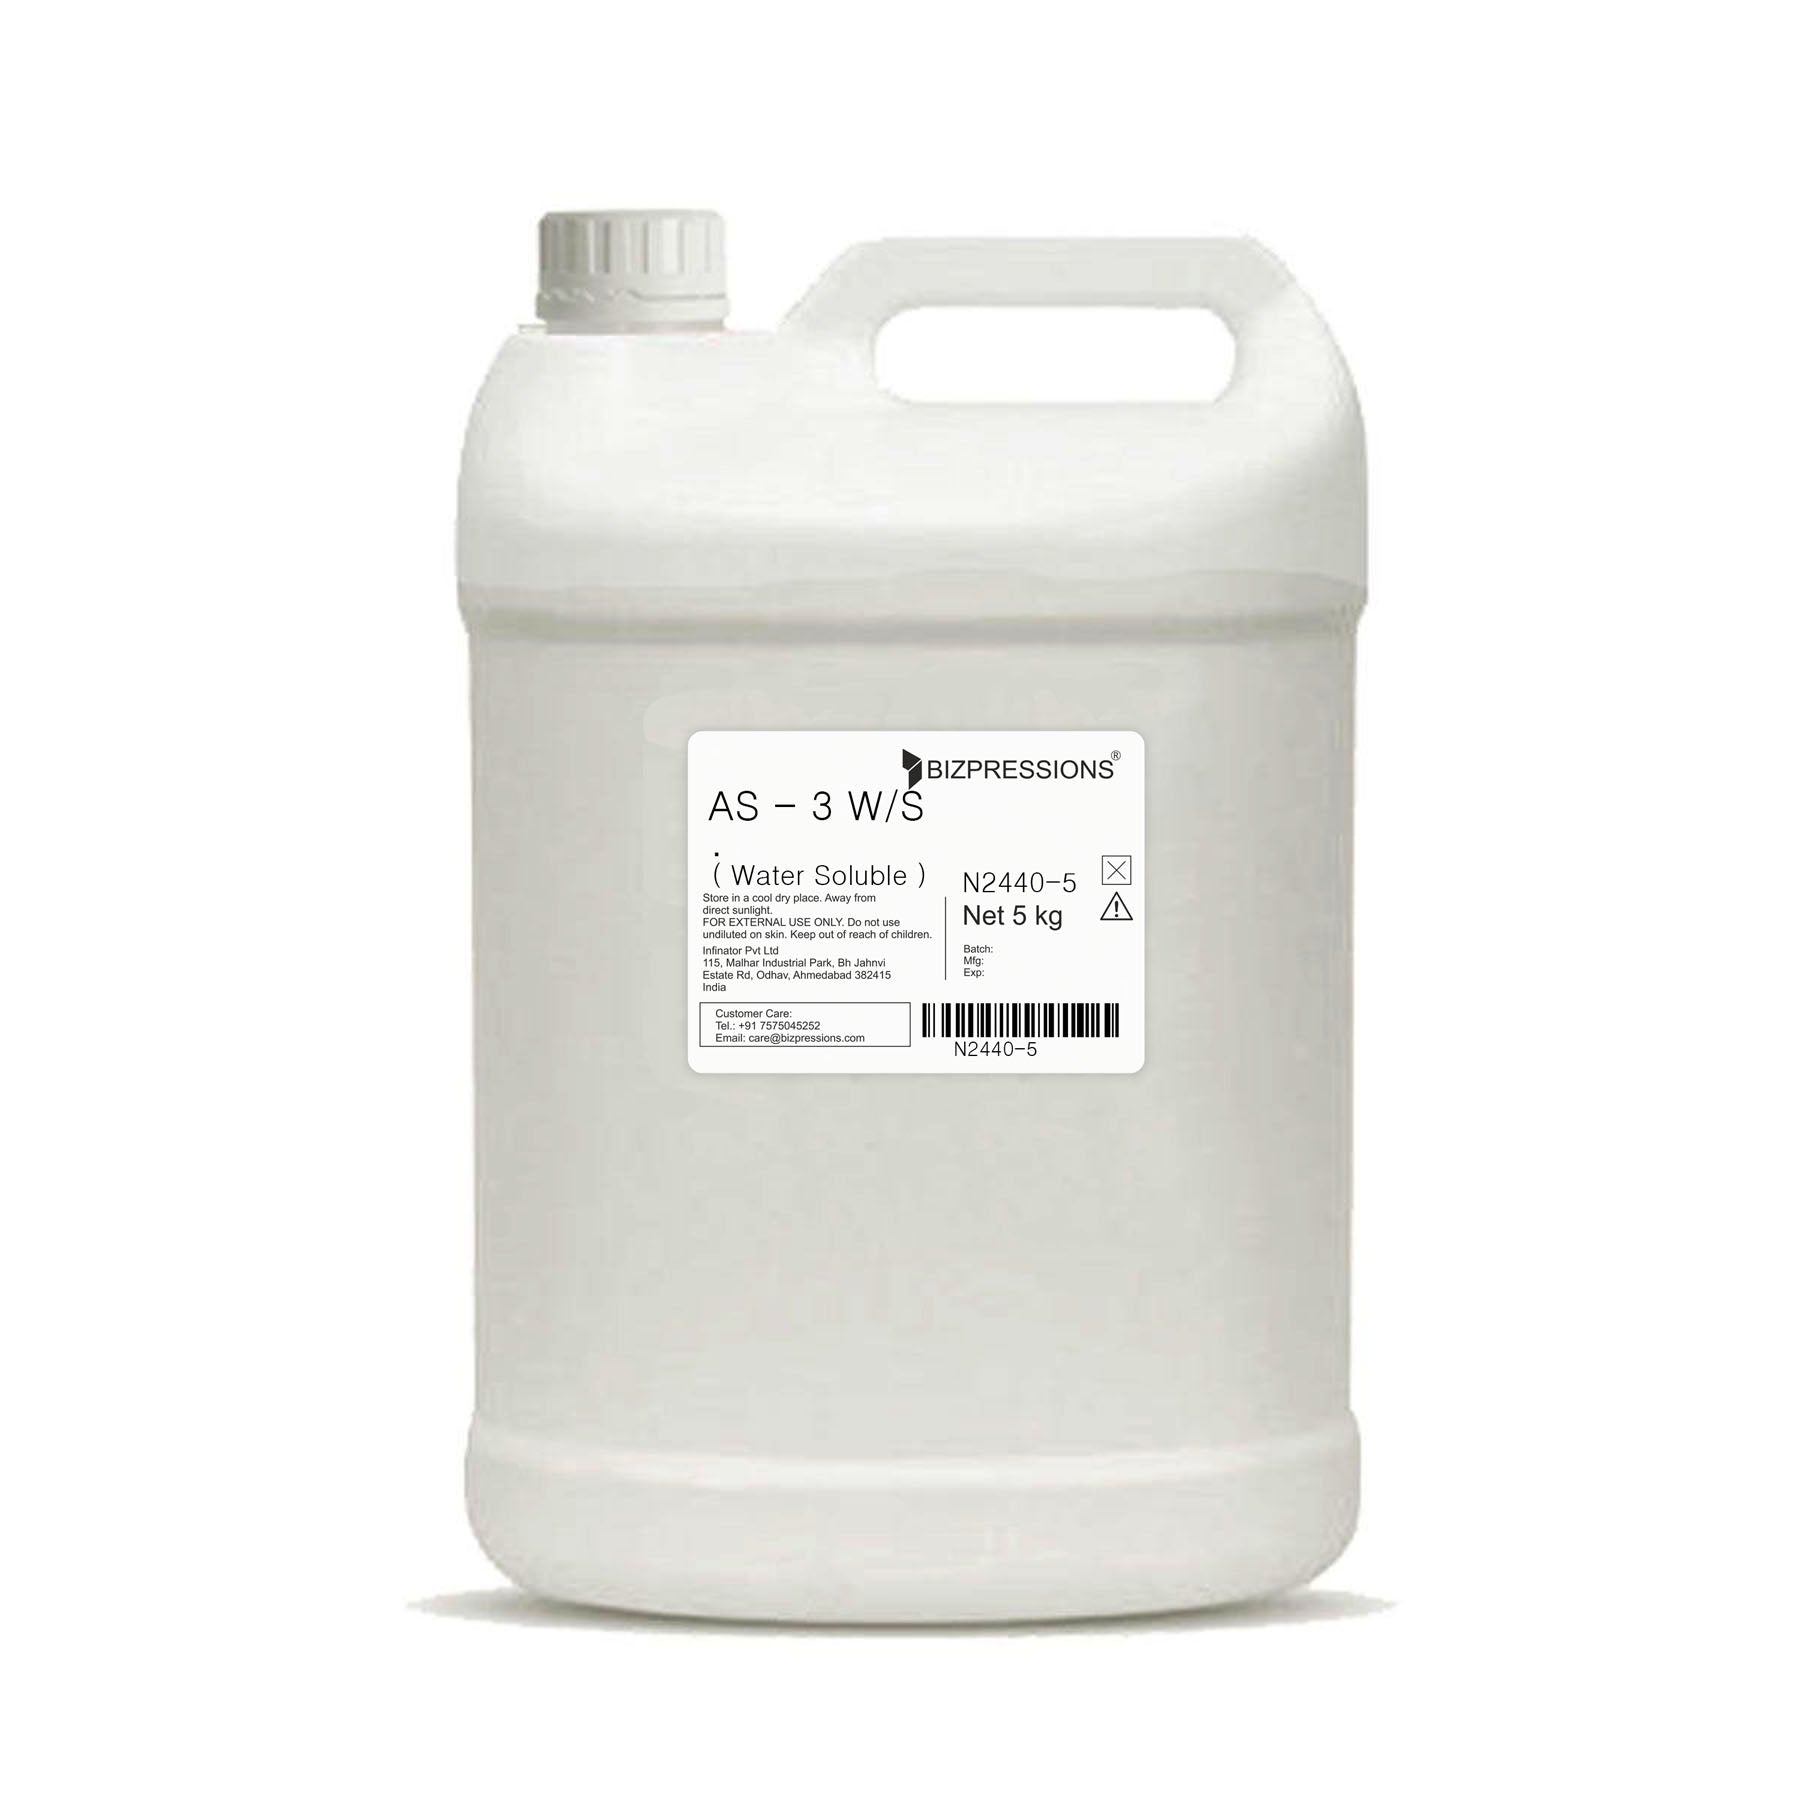 AS - 3 W/S - Fragrance ( Water Soluble ) - 5 kg